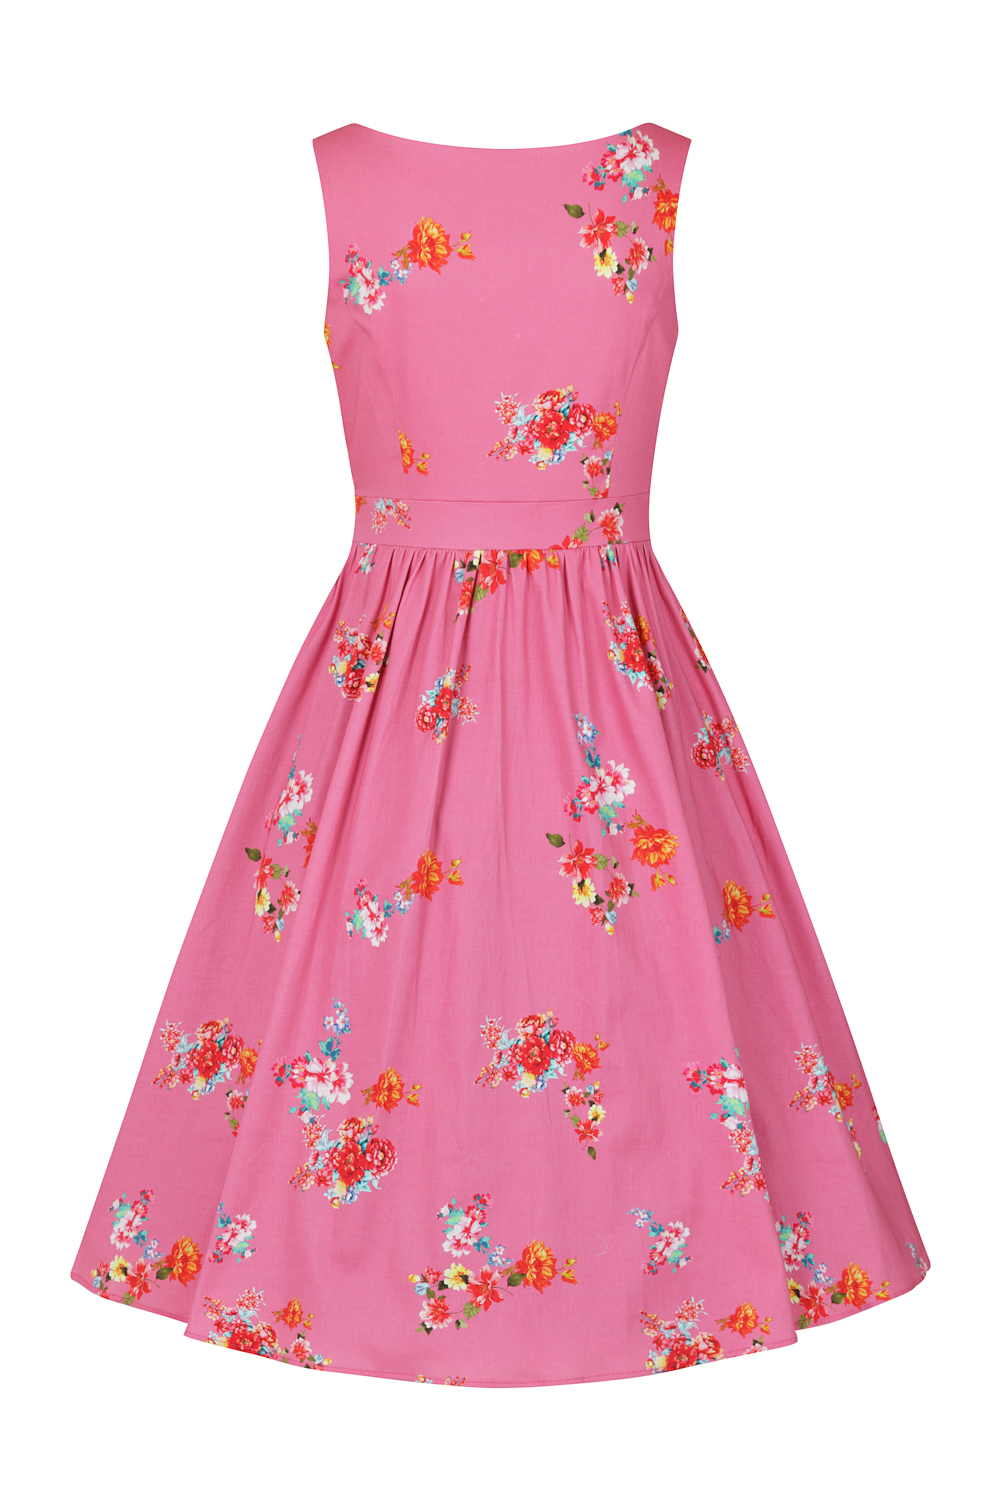 Polly Floral Swing Dress in Pink - Hearts & Roses London